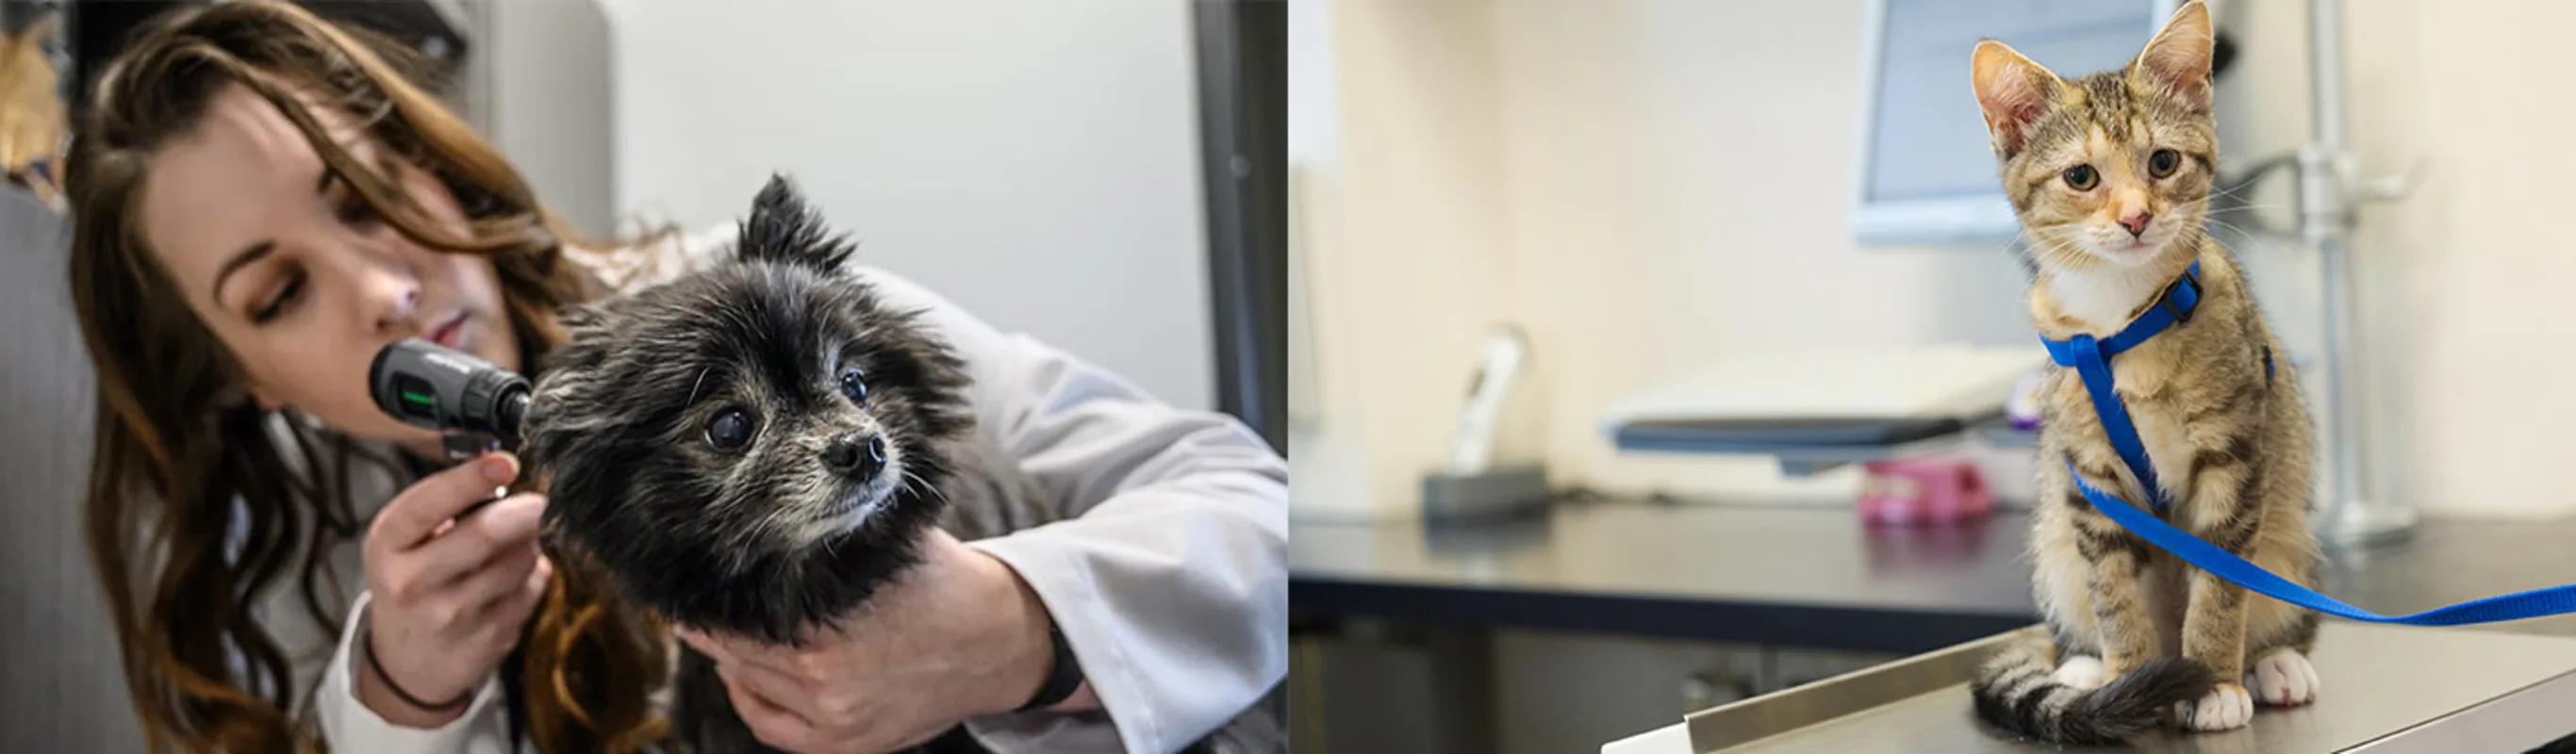 Two images- left is vet checking dog's ear and right image is cat on blue leash sitting on checkup table